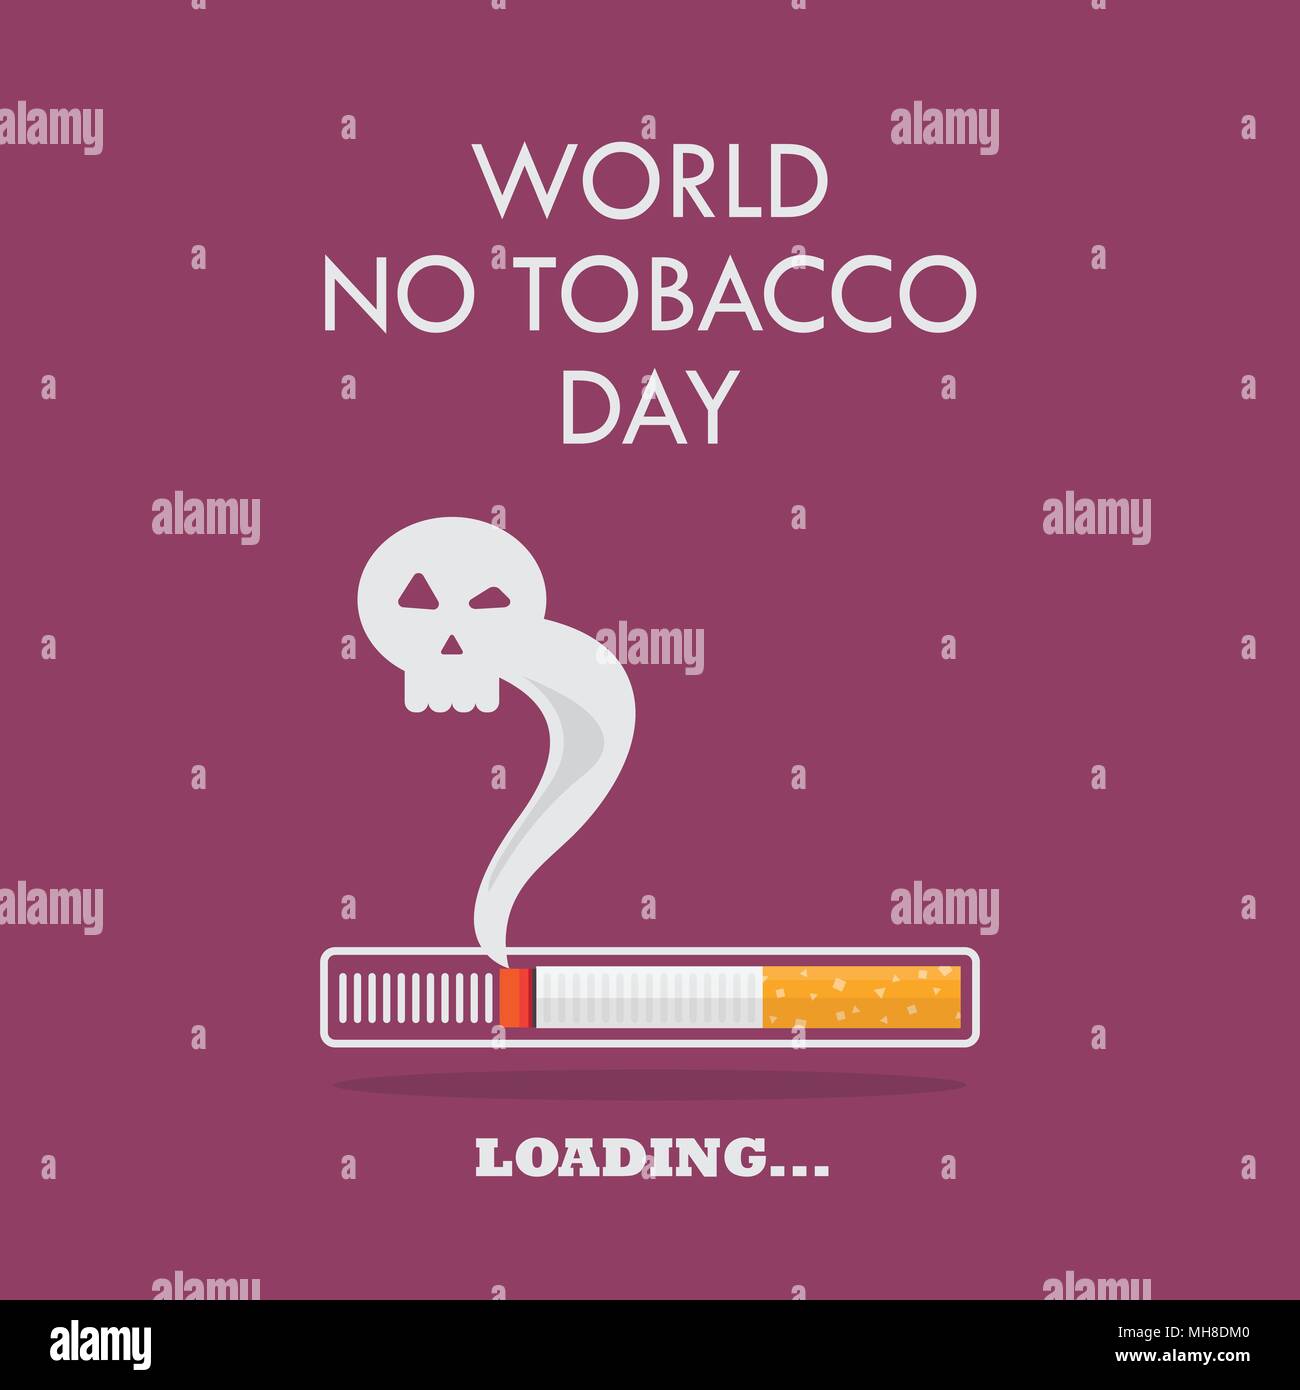 Cigarette burning as cancer loading bar poster. World no tobacco day Stock Vector